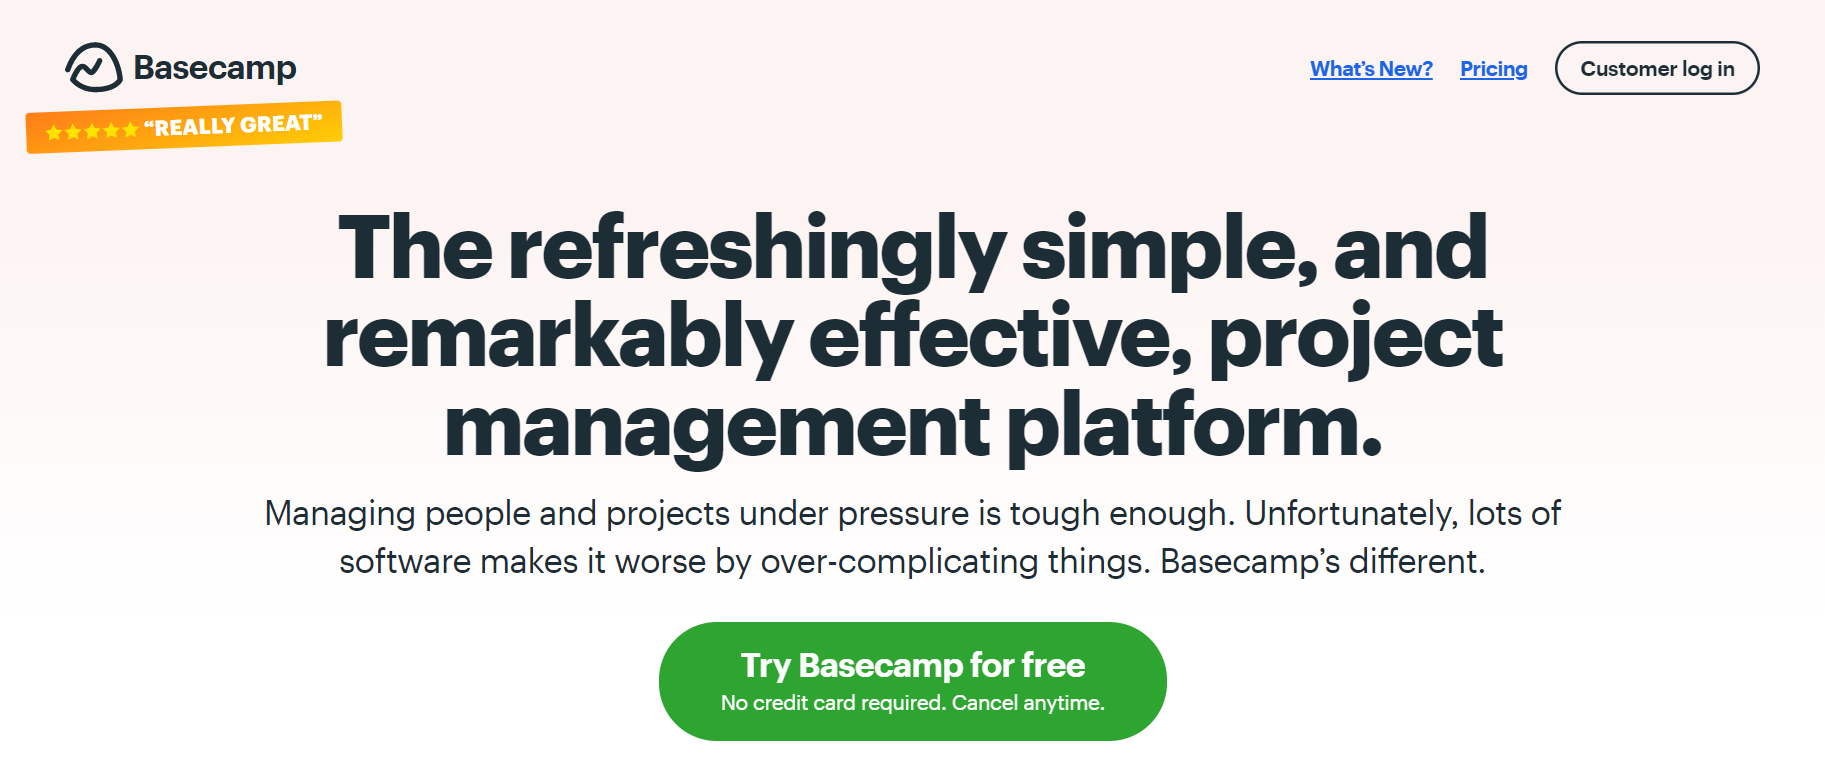 Basecamp homepage, writing why it is good for managing projects and teams